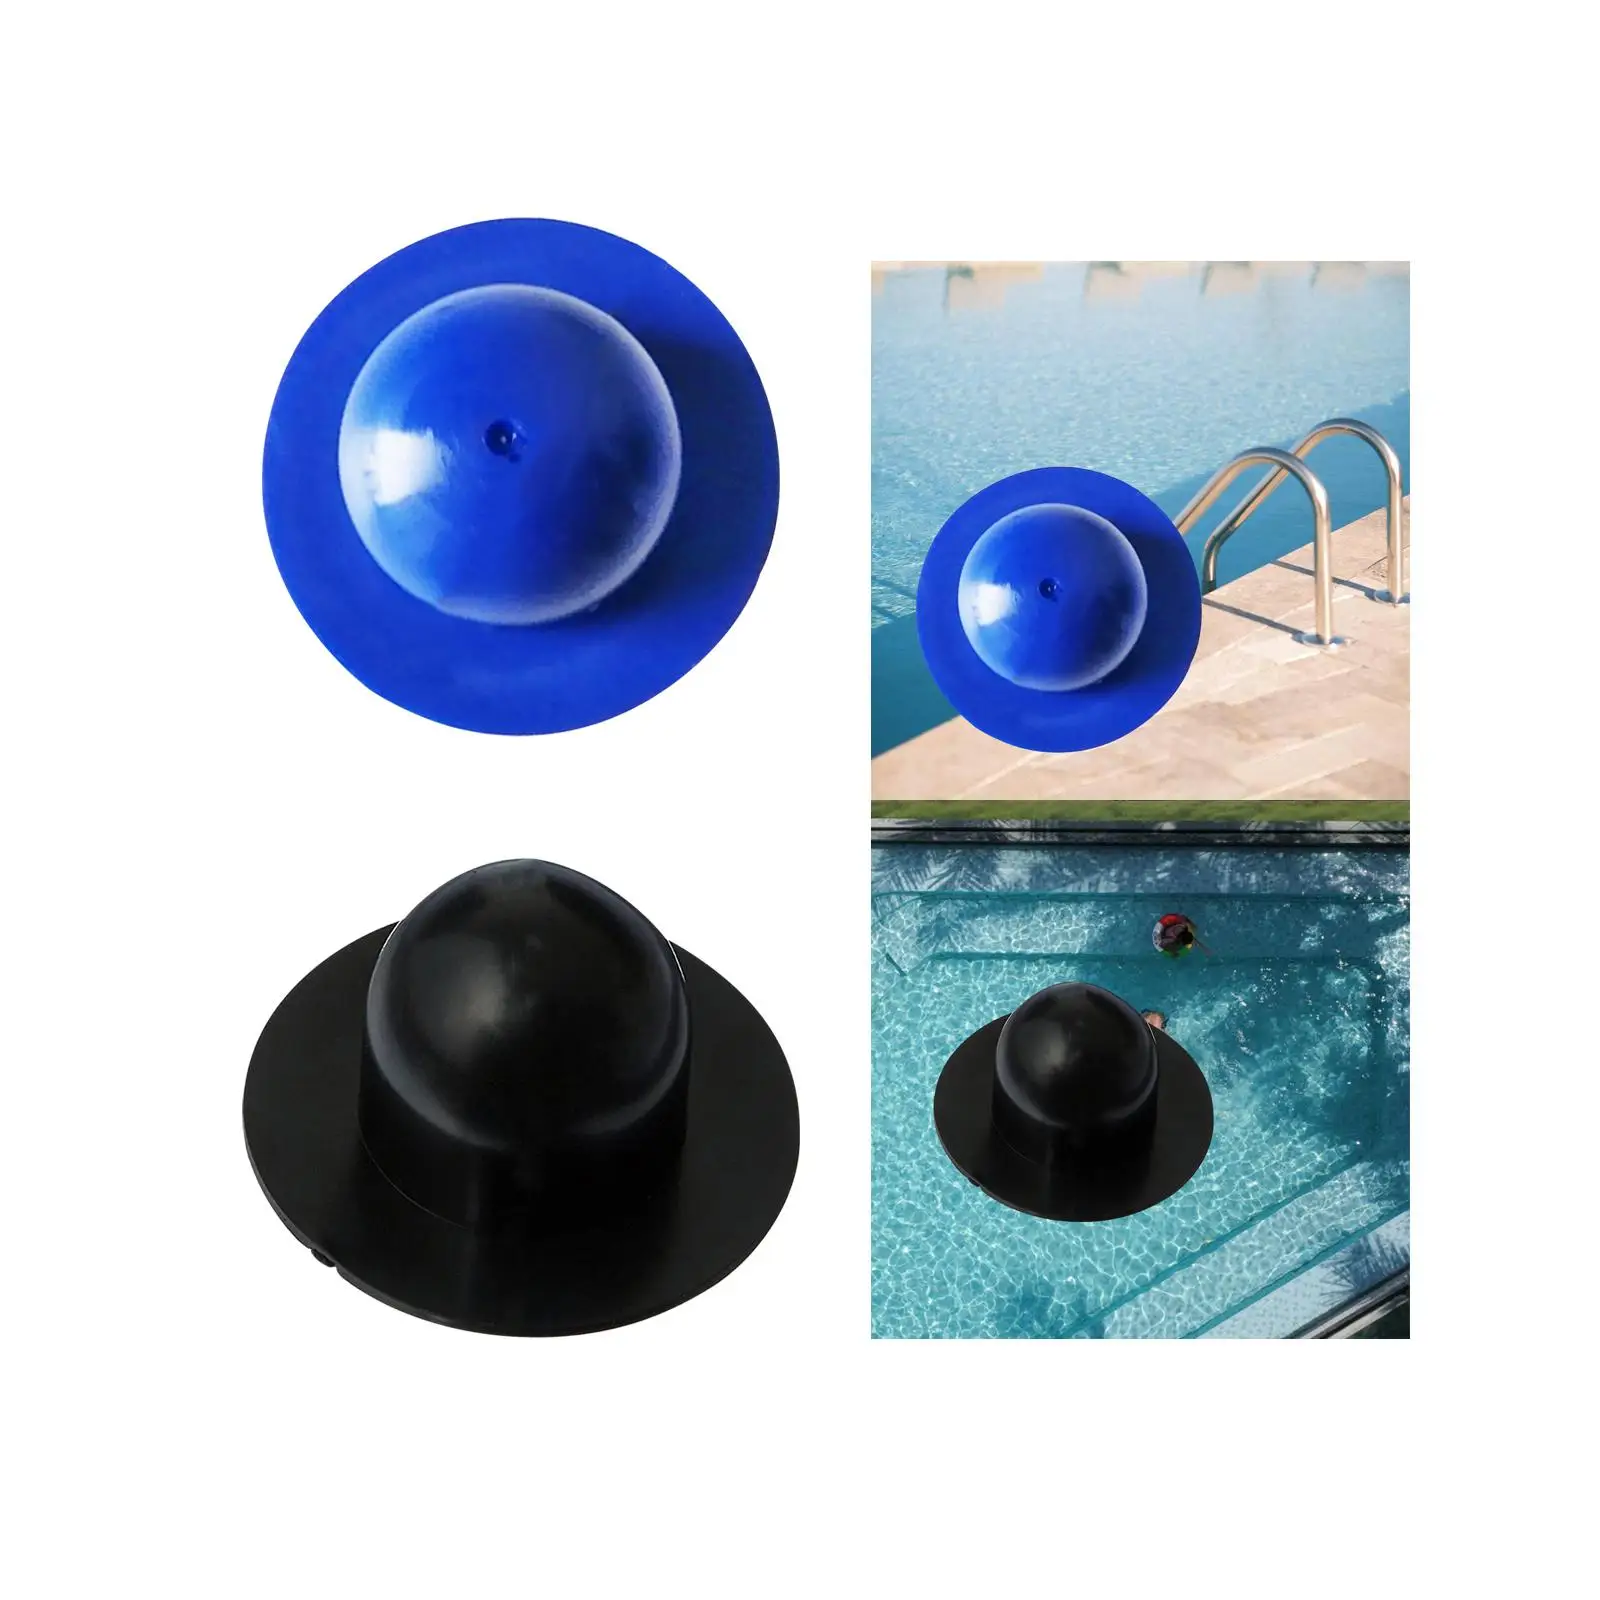 Pool Wall Plugs Filter Pump Stopper Pool Strainer Hose Hole Plug for Inflatable Pool Most above Ground Pools Accessories